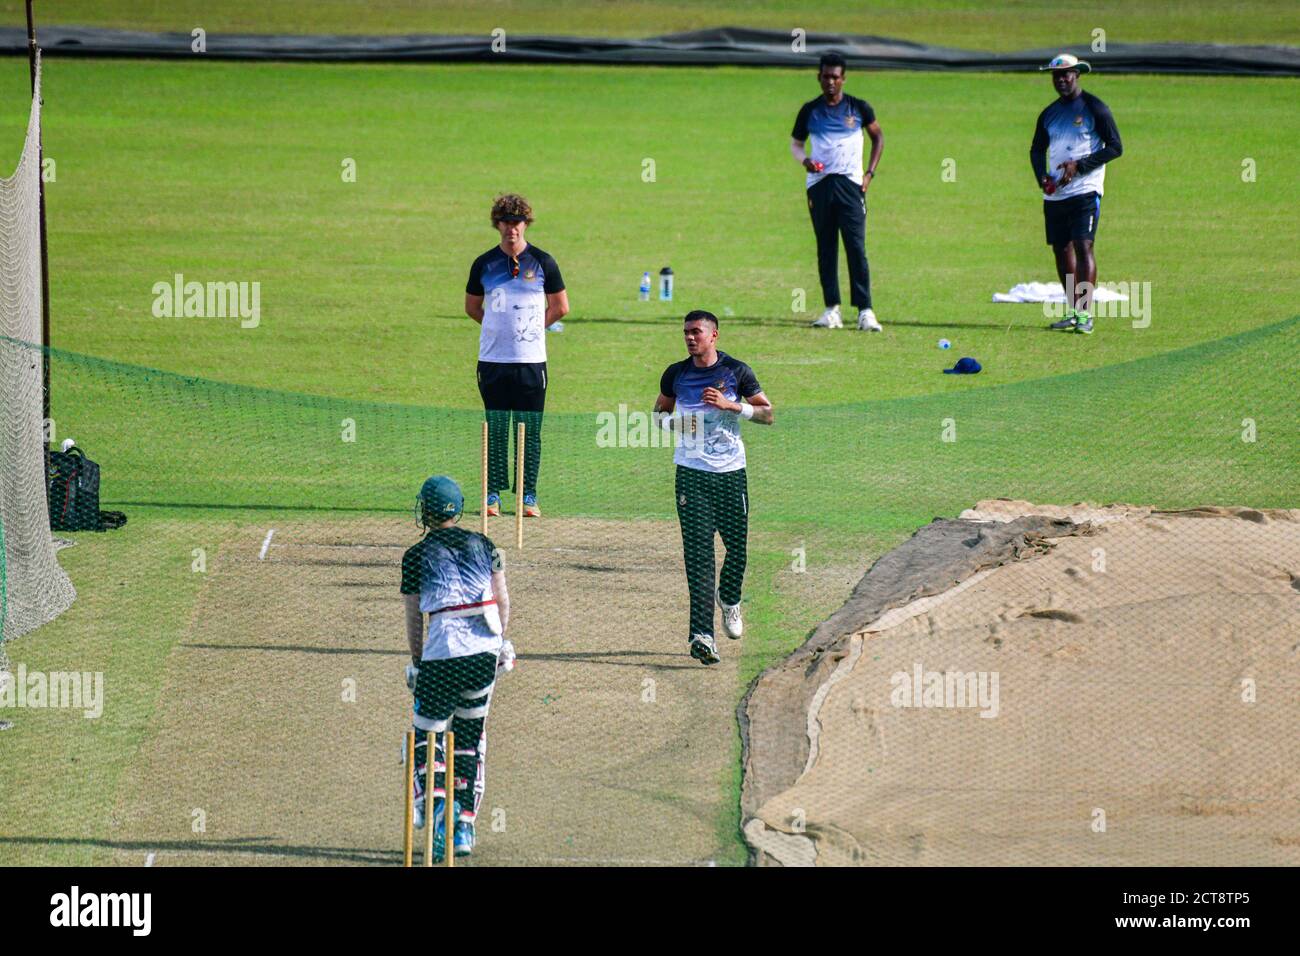 Dhaka, Bangladesh. 21st Sep, 2020. Bangladesh National Cricket team players in action during practice session at Sher-e-Bangla National Cricket Stadium in Dhaka.Bangladesh is likely to play two tests in Kandy and the third in Colombo, with the side tour Sri Lanka this month. A tentative fixture has been chalked by the Bangladesh Cricket Board and Sri Lanka Cricket which will be revealed ahead of the series. Credit: SOPA Images Limited/Alamy Live News Stock Photo